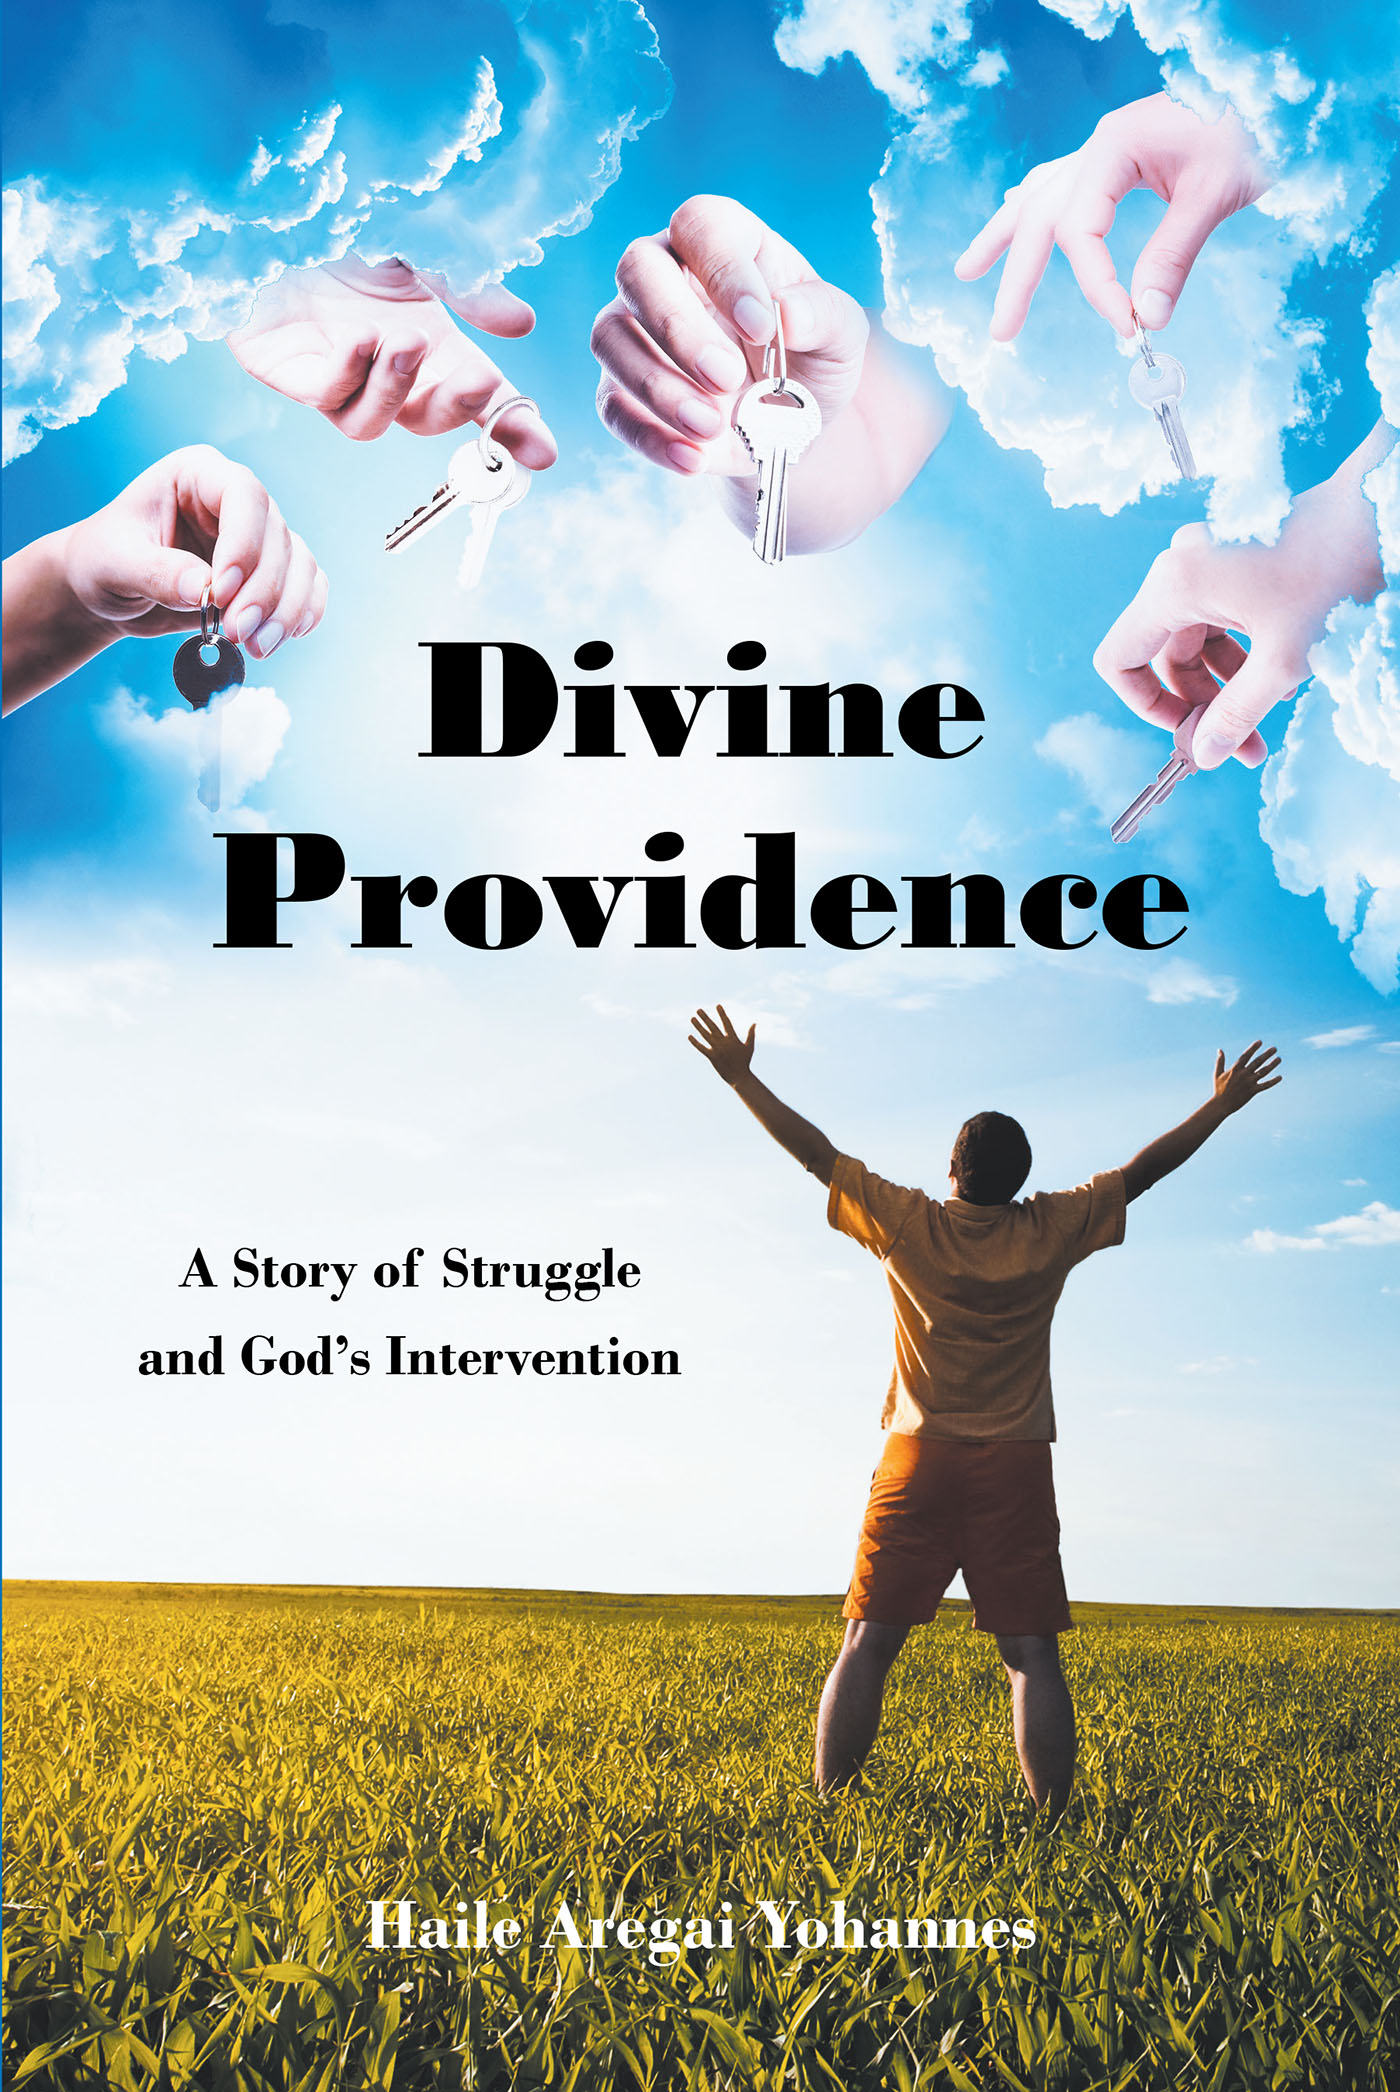 Haile Aregai Yohannes’s Newly Released "Divine Providence: A Story of Struggle and God’s Intervention" is a Powerful and Thoughtful Memoir